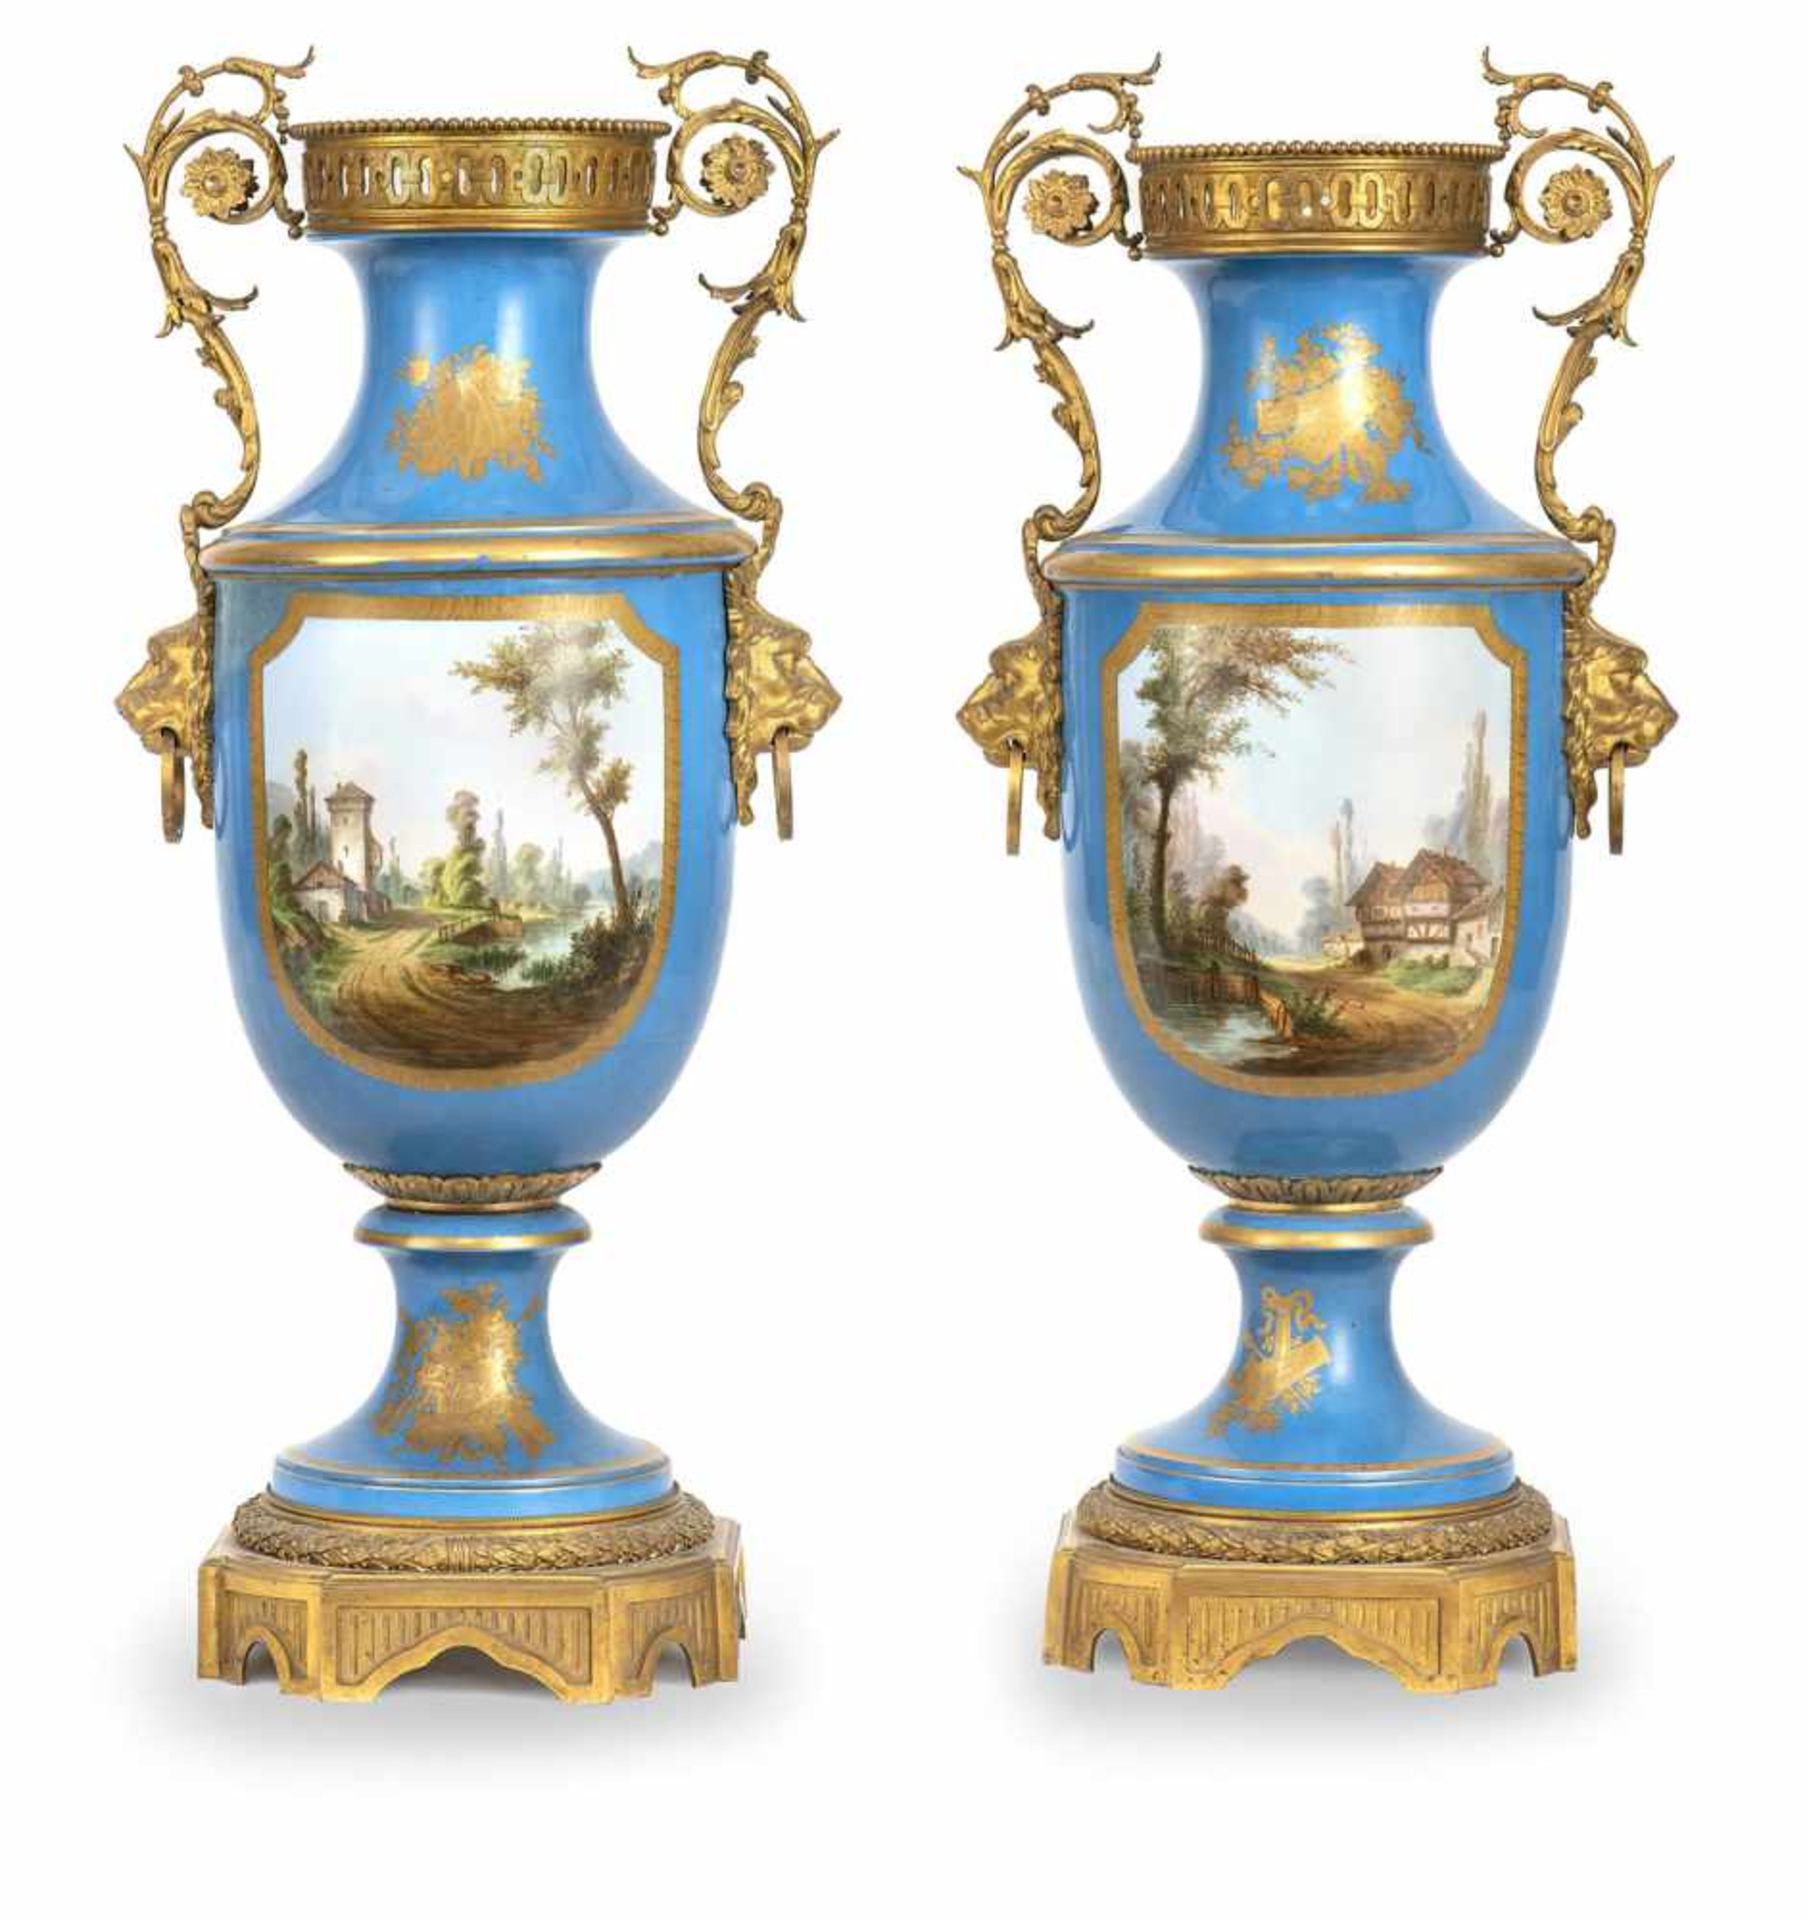 A PAIR OF BIG FRENCH/SEVRES BRONZE MOUNTED PORCELAIN VASES, middle of 19th century. Blue celeste